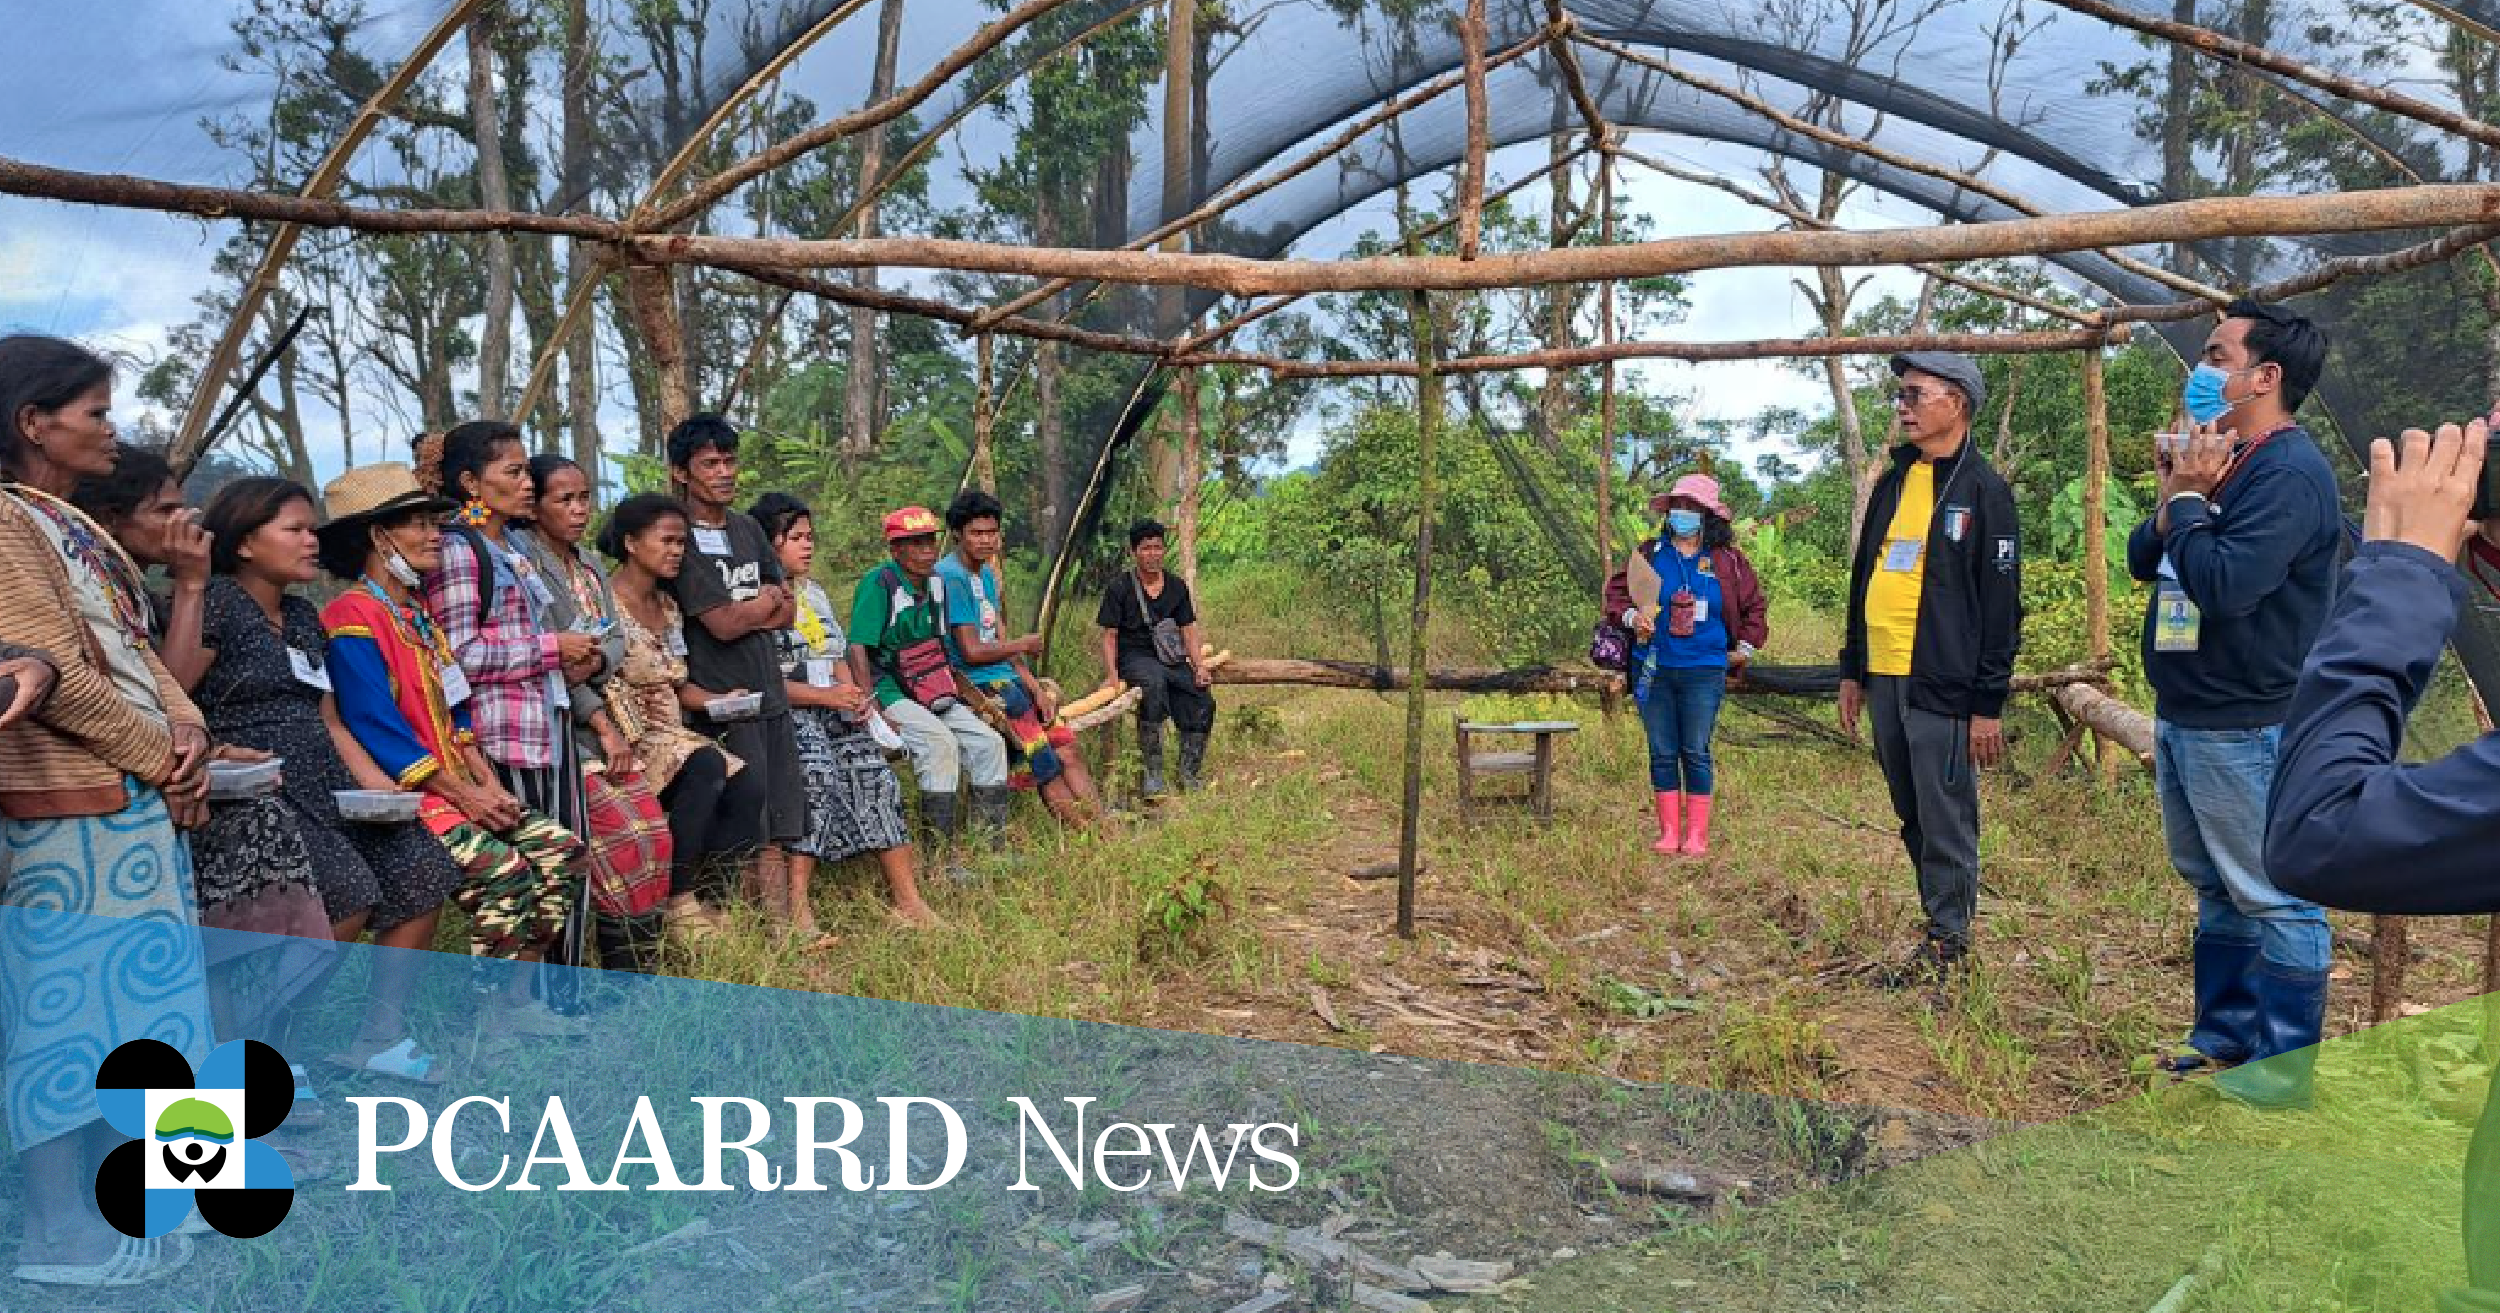 A team of researchers and scientists from Central Mindanao lead the capacity-building activities  with indigenous communities in Mindanao. (Image credit: Central Mindanao University)